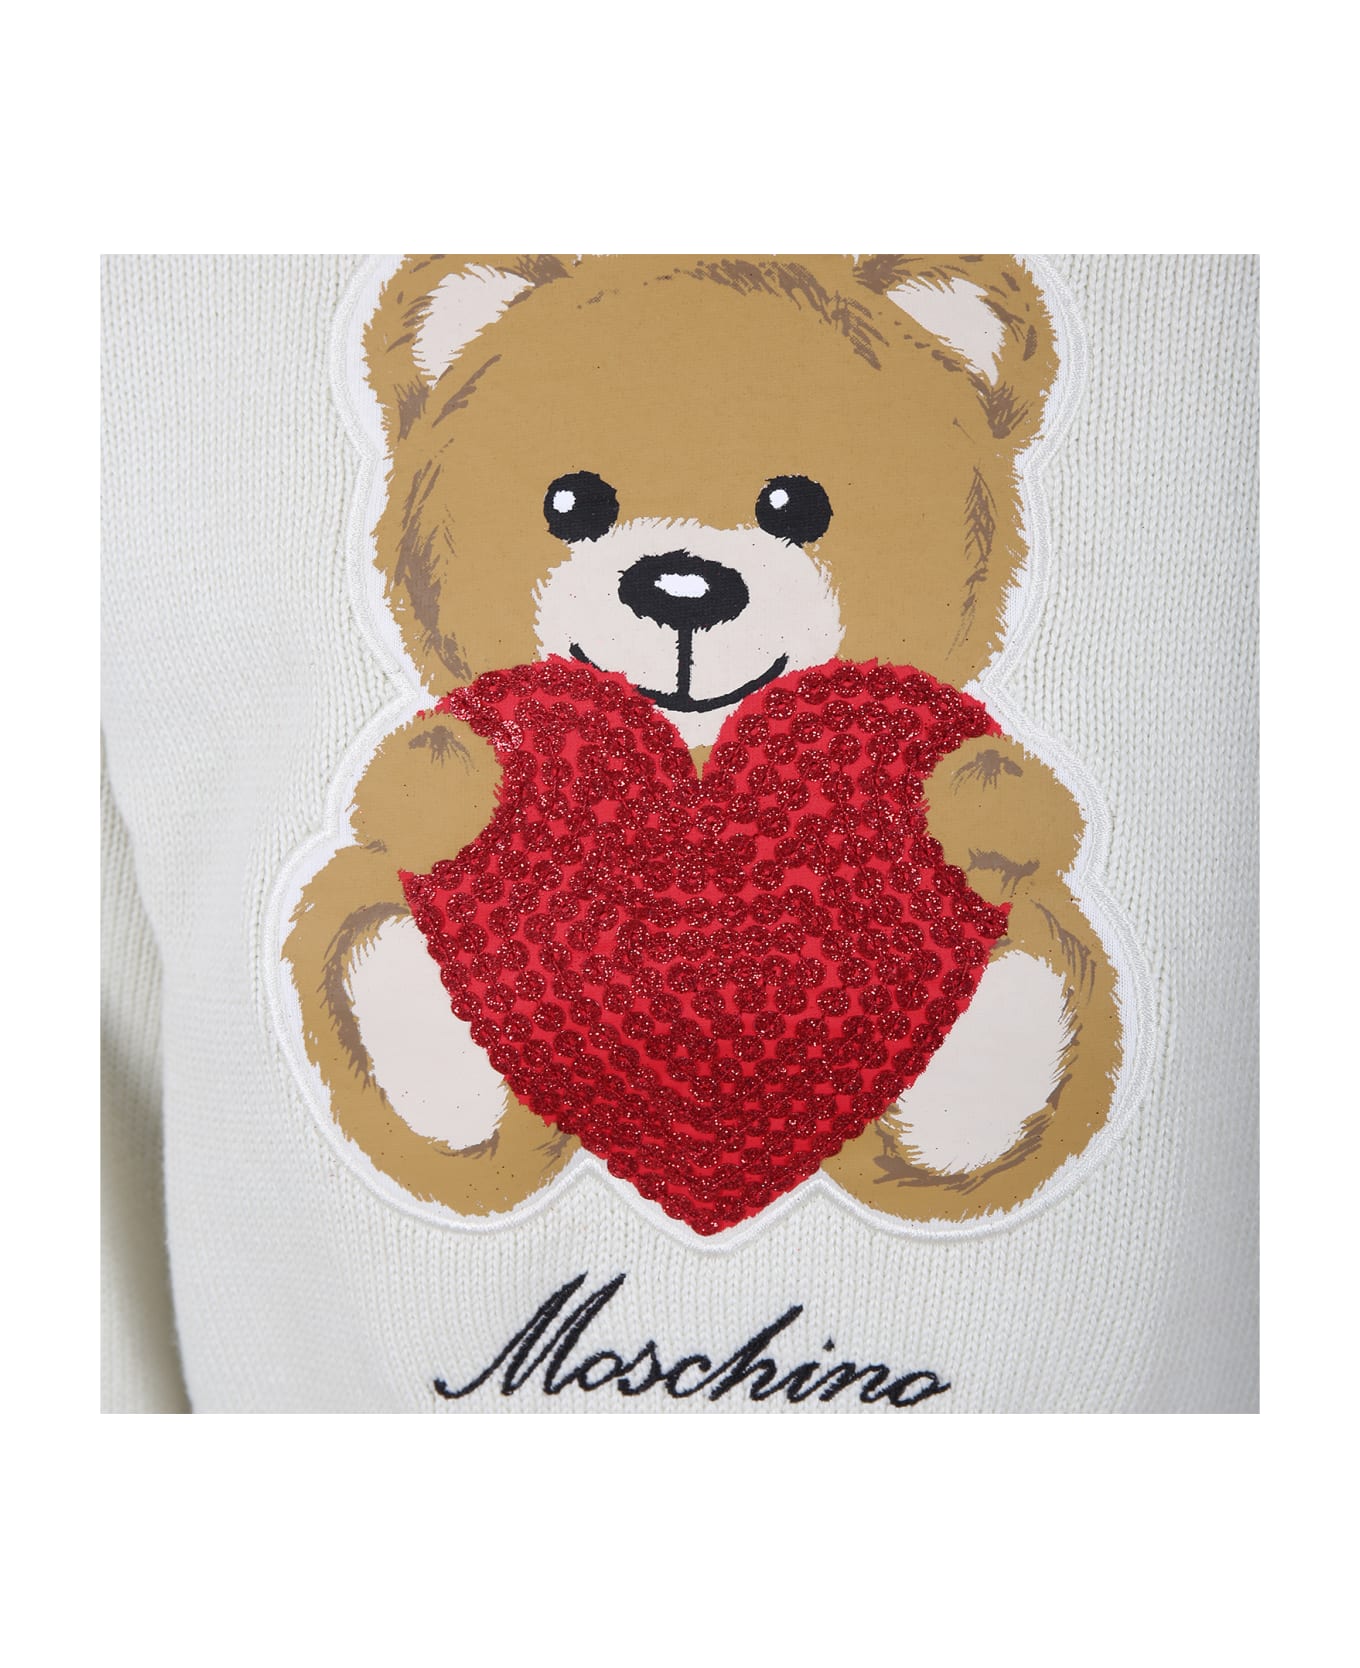 Moschino White Sweater For Girl With Teddy Bear And Heart - White